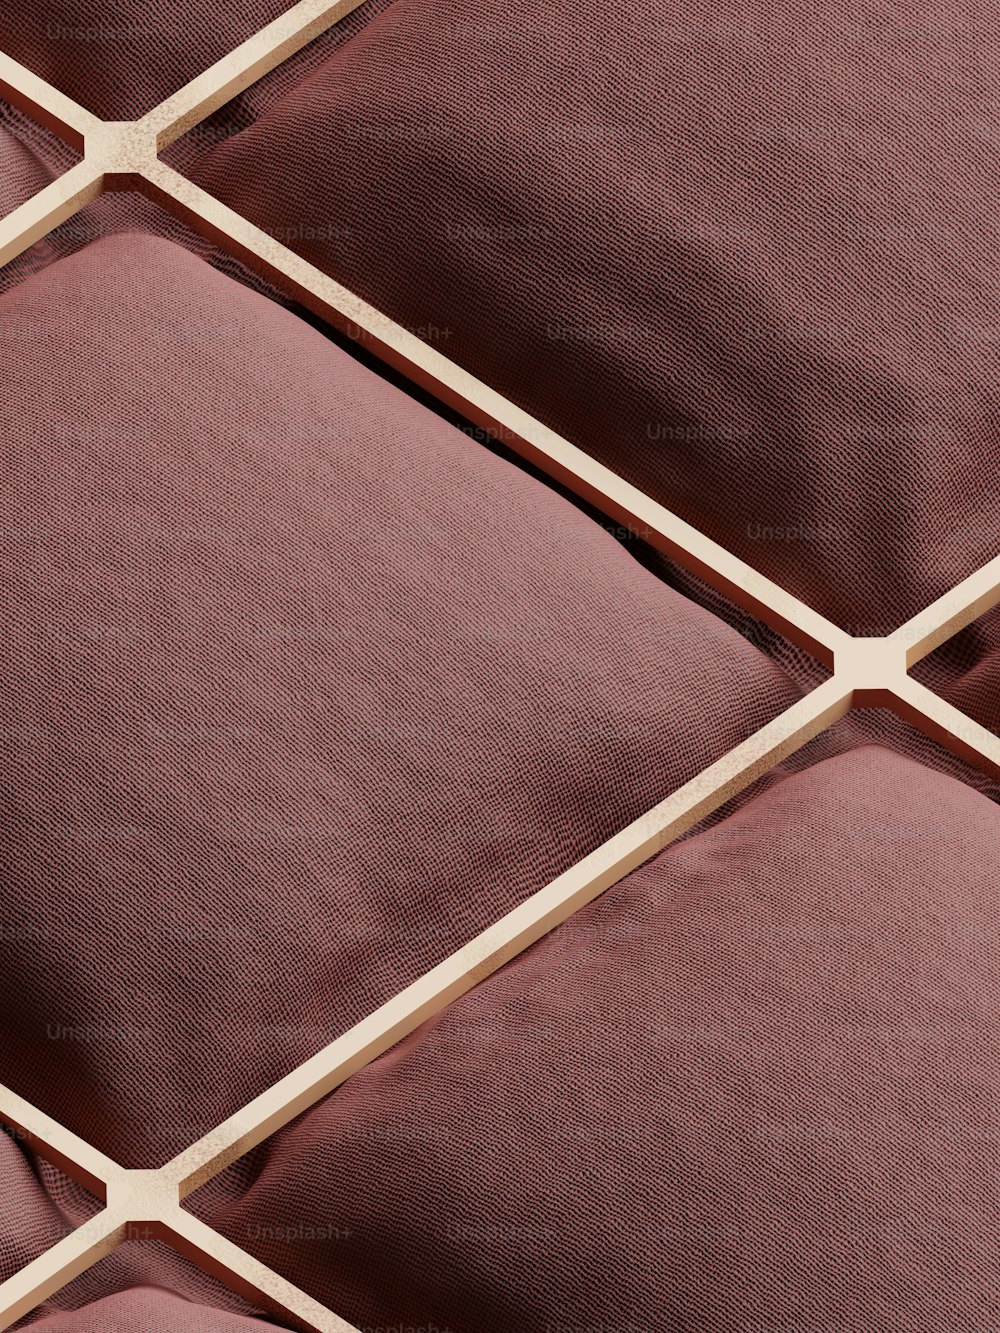 a close up of a brown and white tile pattern